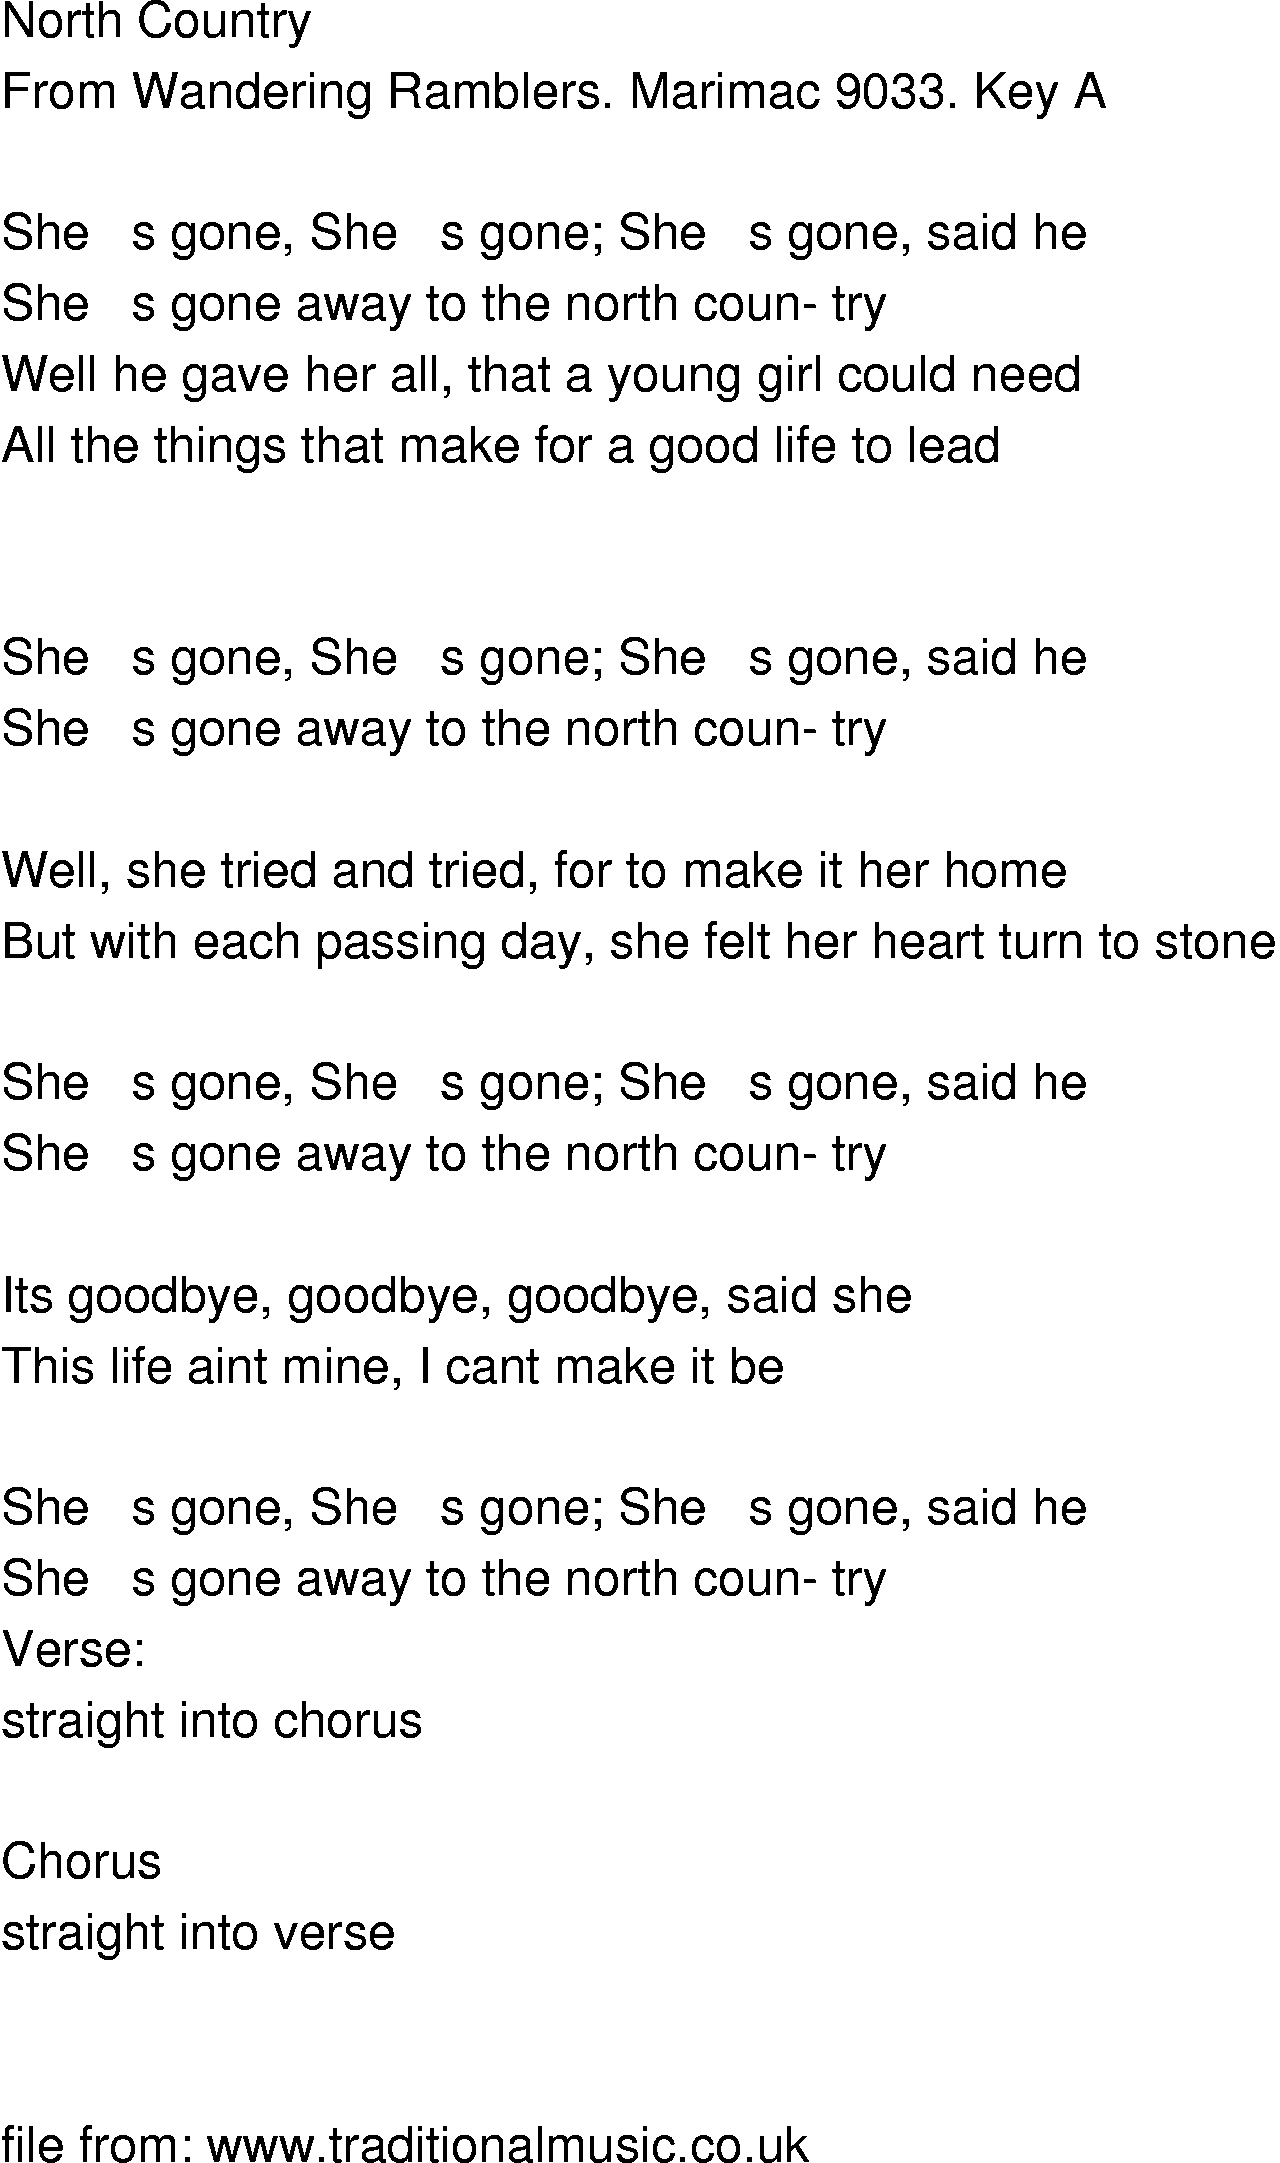 Old-Time (oldtimey) Song Lyrics - north country